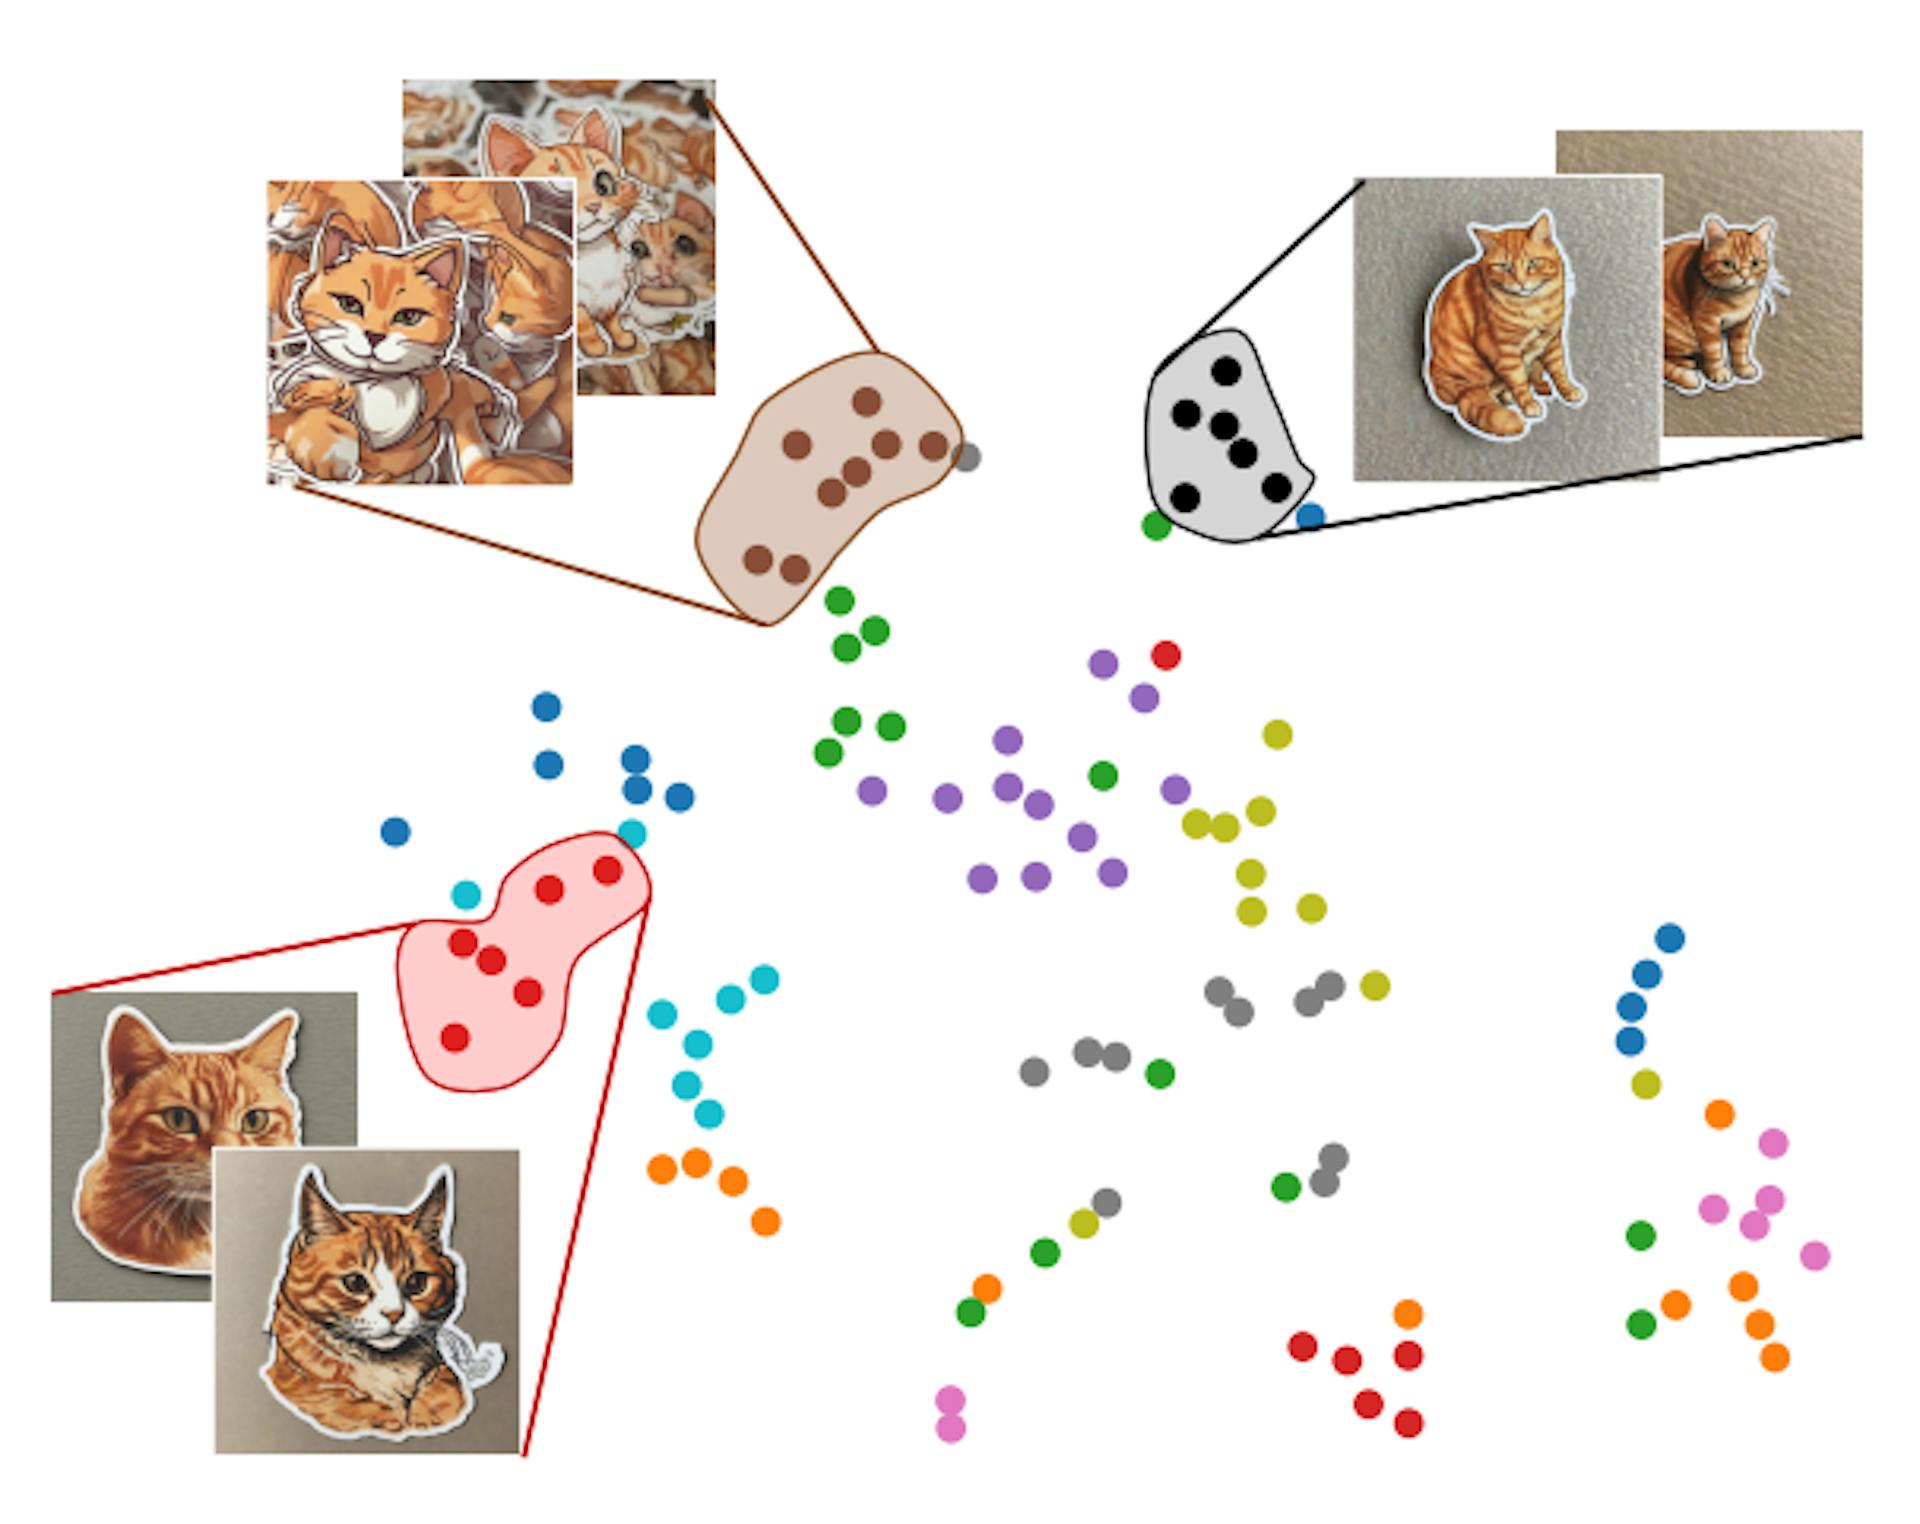 Figure 4. Embedding visualization. Given generated images for the text prompt “a sticker of a ginger cat”, we project the set S of their high-dimensional embeddings into 2D using t-SNE [29] and indicate different K-MEANS++ [4] clusters using different colors. Representative images are shown for three of the clusters. It may be seen that images in each cluster share the same characteristics: black cluster — full body cats, red cluster — cat heads, brown cluster — images with multiple cats. According to our cohesion measure (1), the black cluster is the most cohesive, and therefore, chosen for identity extraction (or refinement).